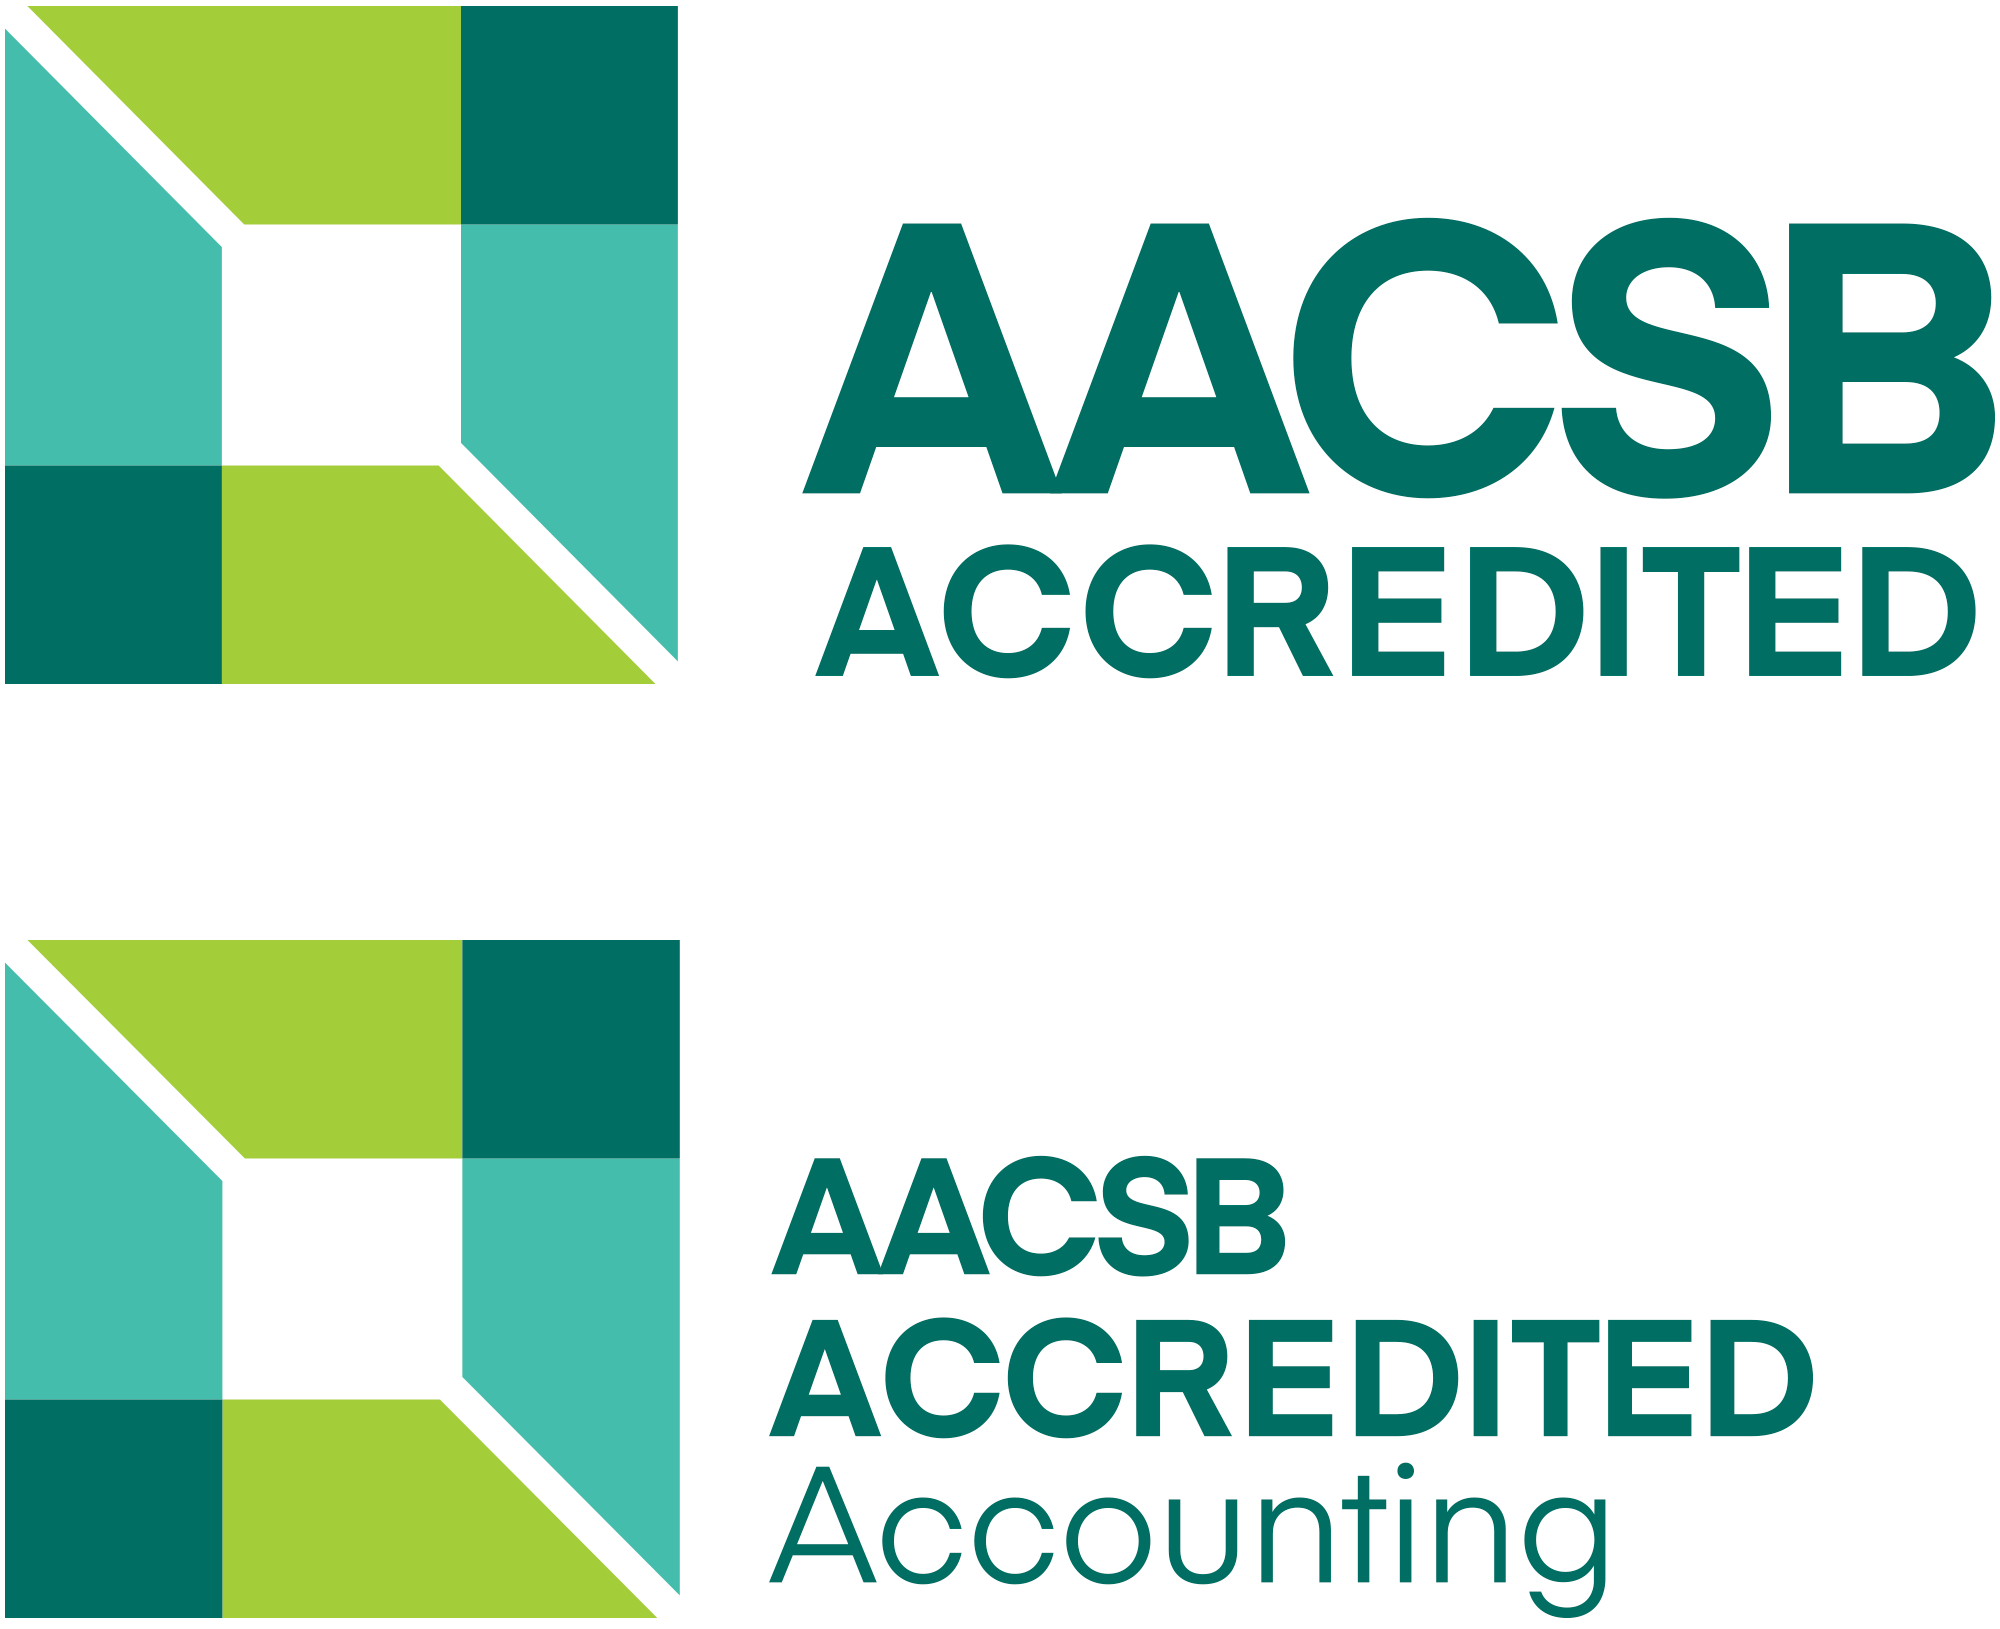 AACSB accreditation logos for business and accounting